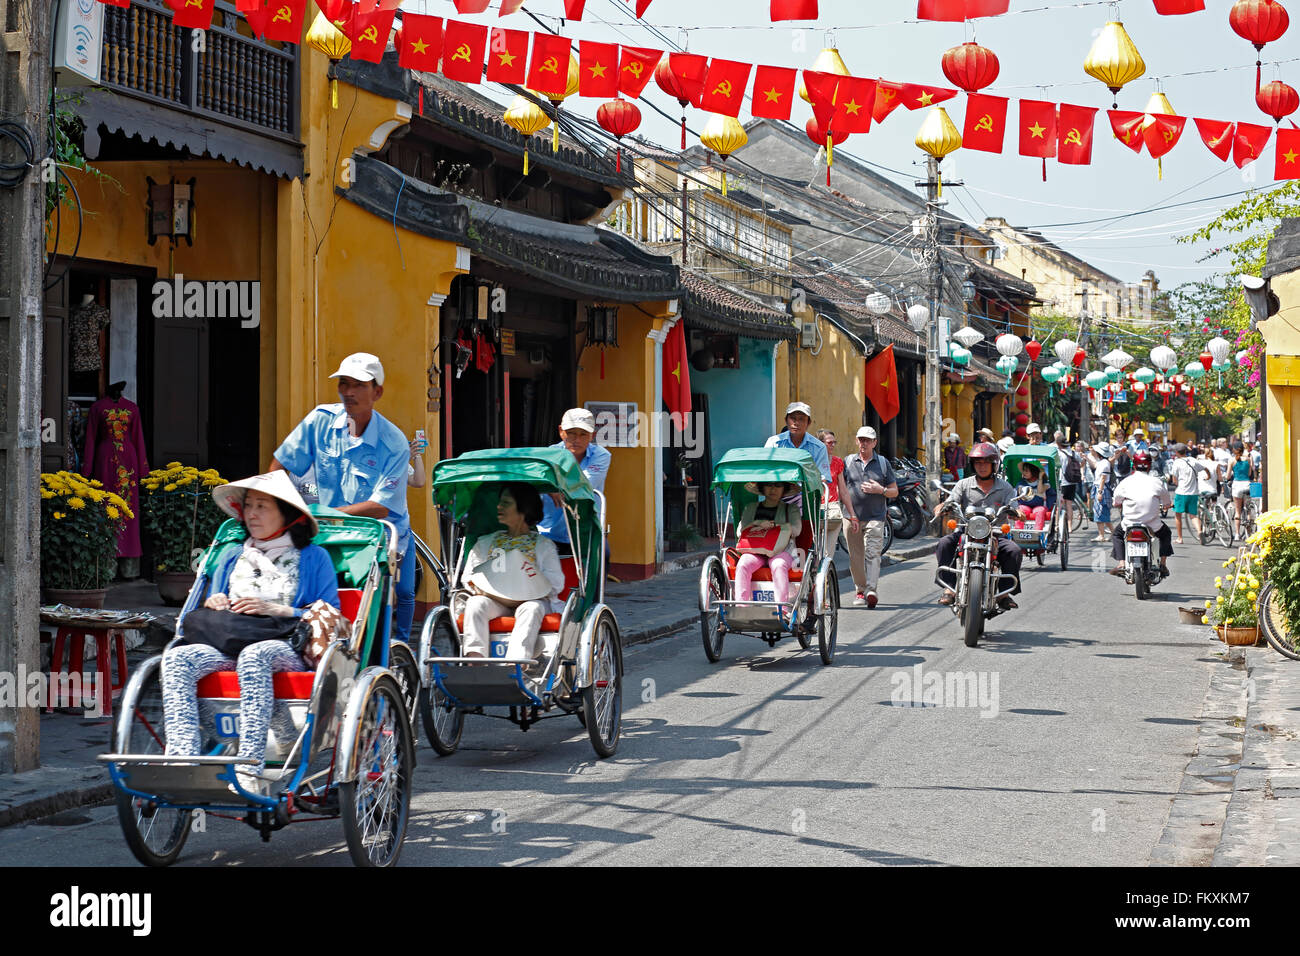 Colorful lanterns and cyclos on street, Hoi An, Vietnam Stock Photo